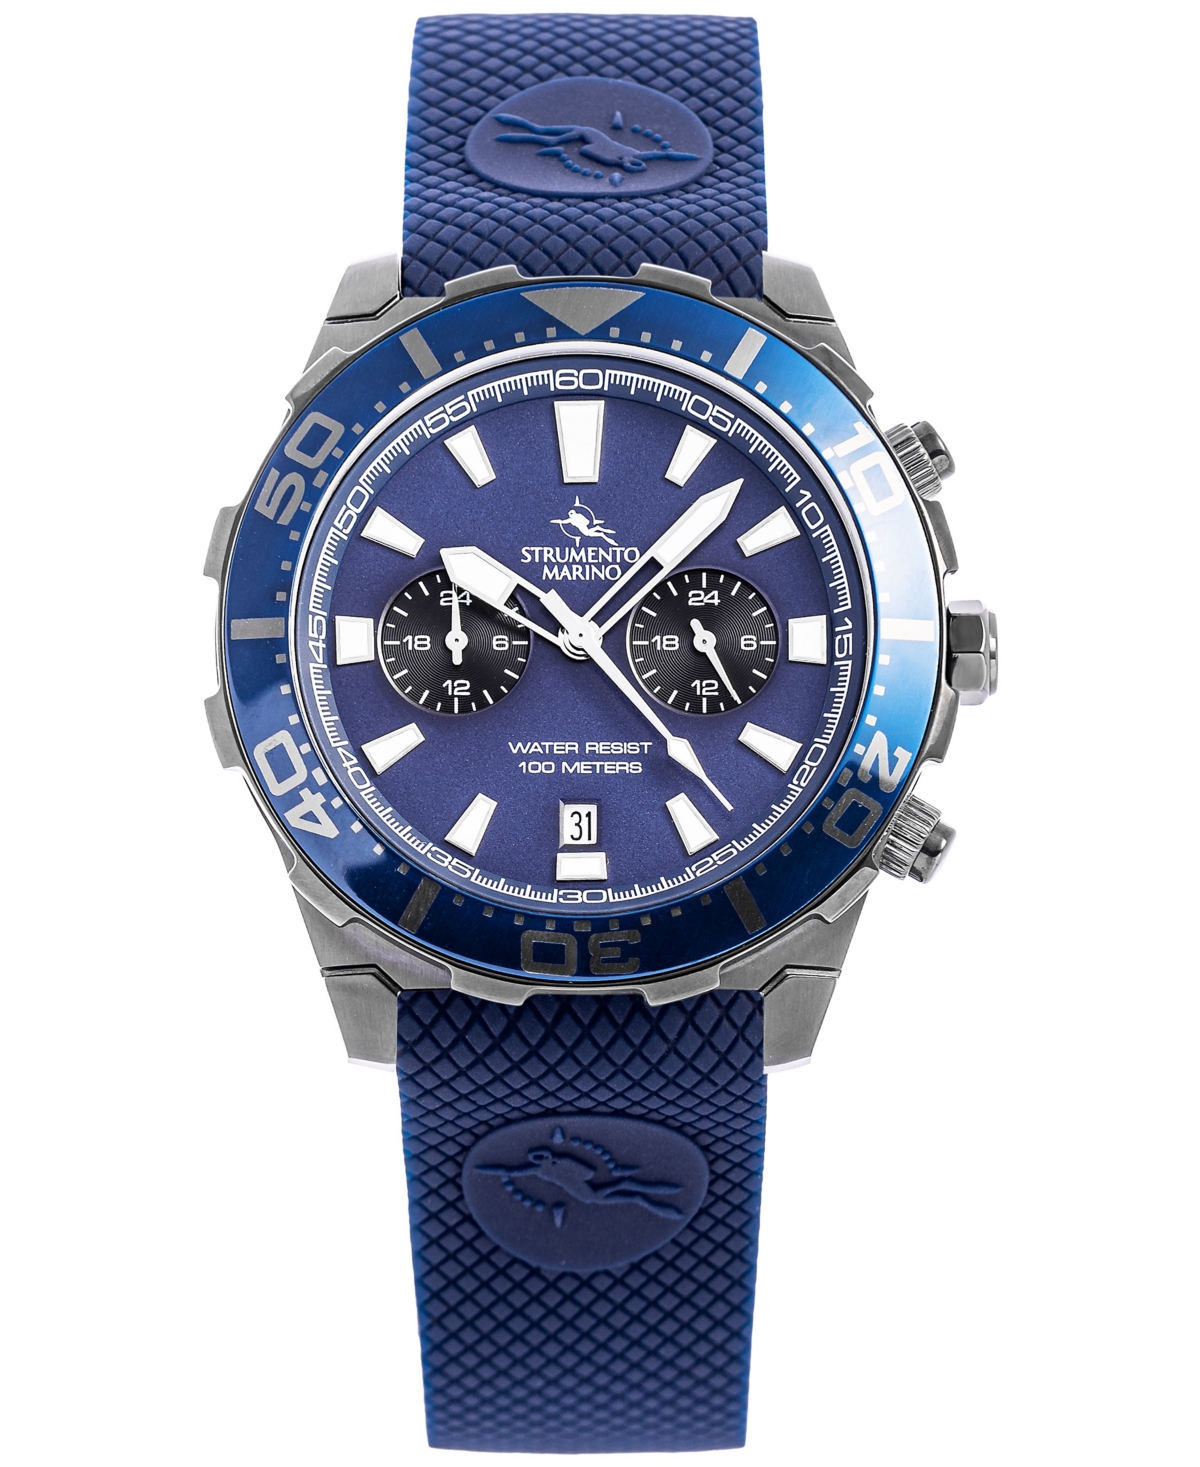 Men's Dual Time Zone Skipper Blue Silicone Strap Watch 44mm, Created for Macy's - Gun Metal  Blue